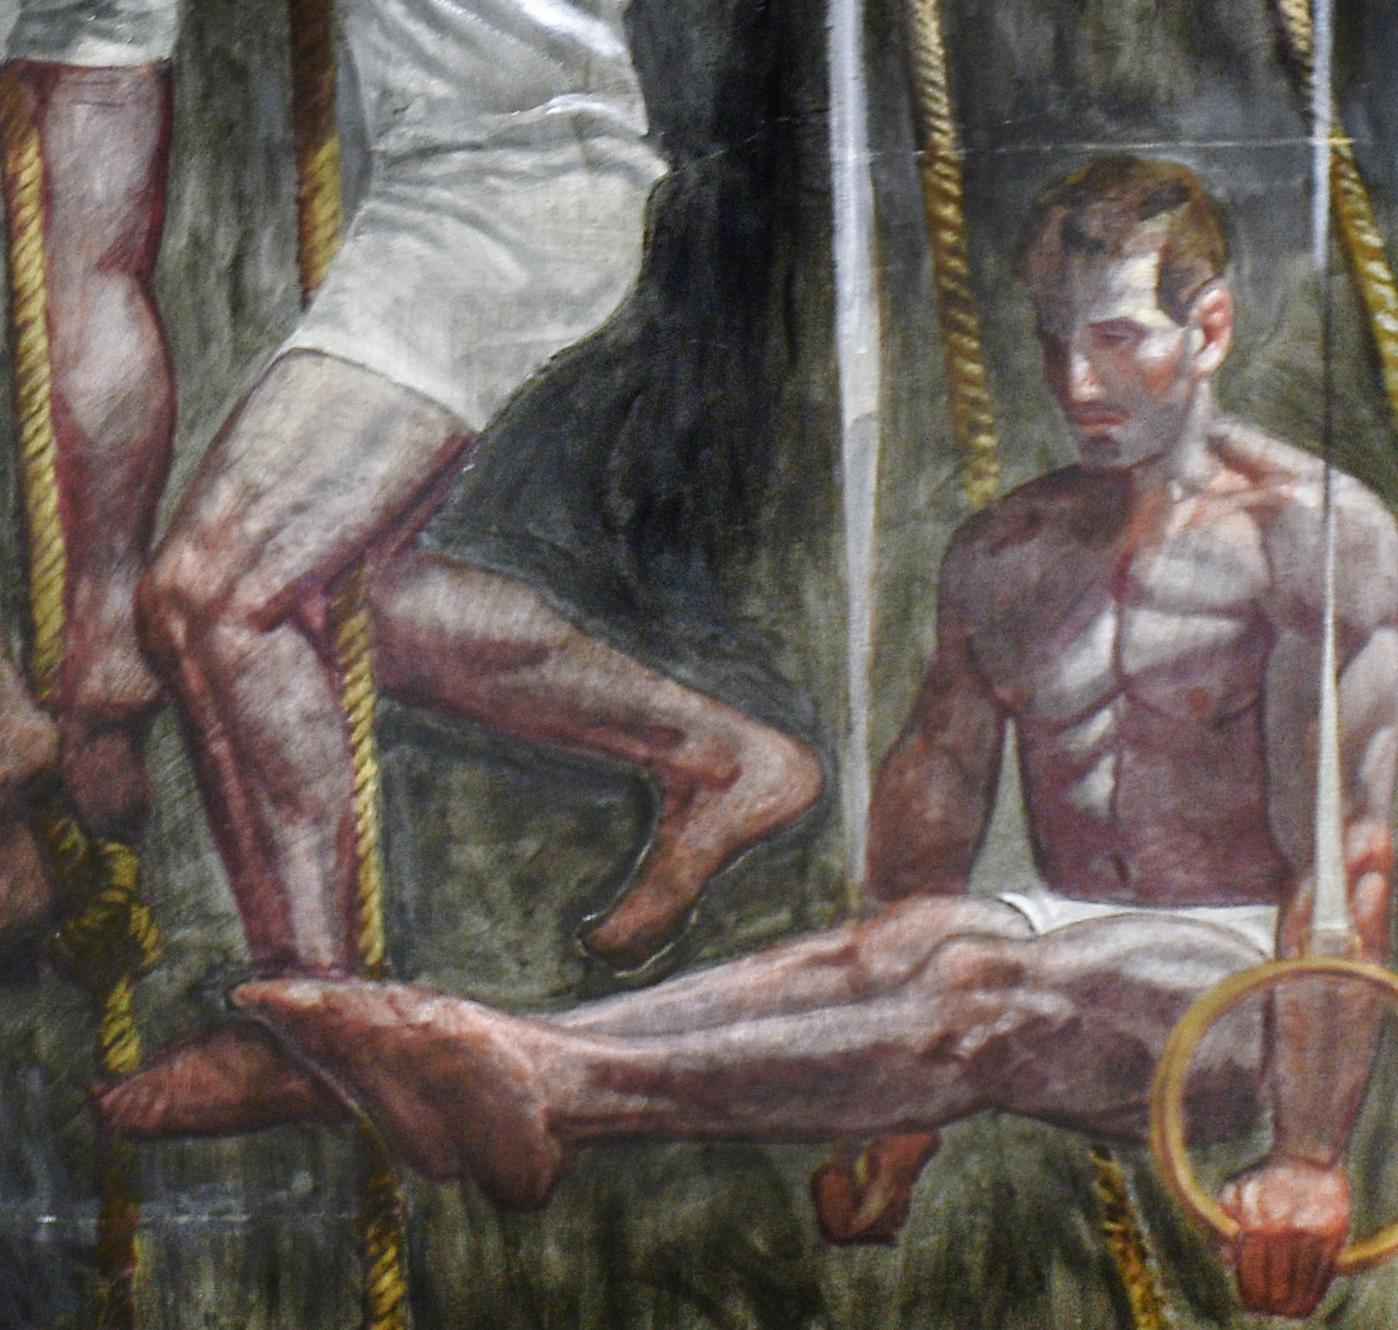 Five Gymnasts in Training (Large Academic Style Figurative Painting of Athletes) - Black Portrait Painting by Mark Beard